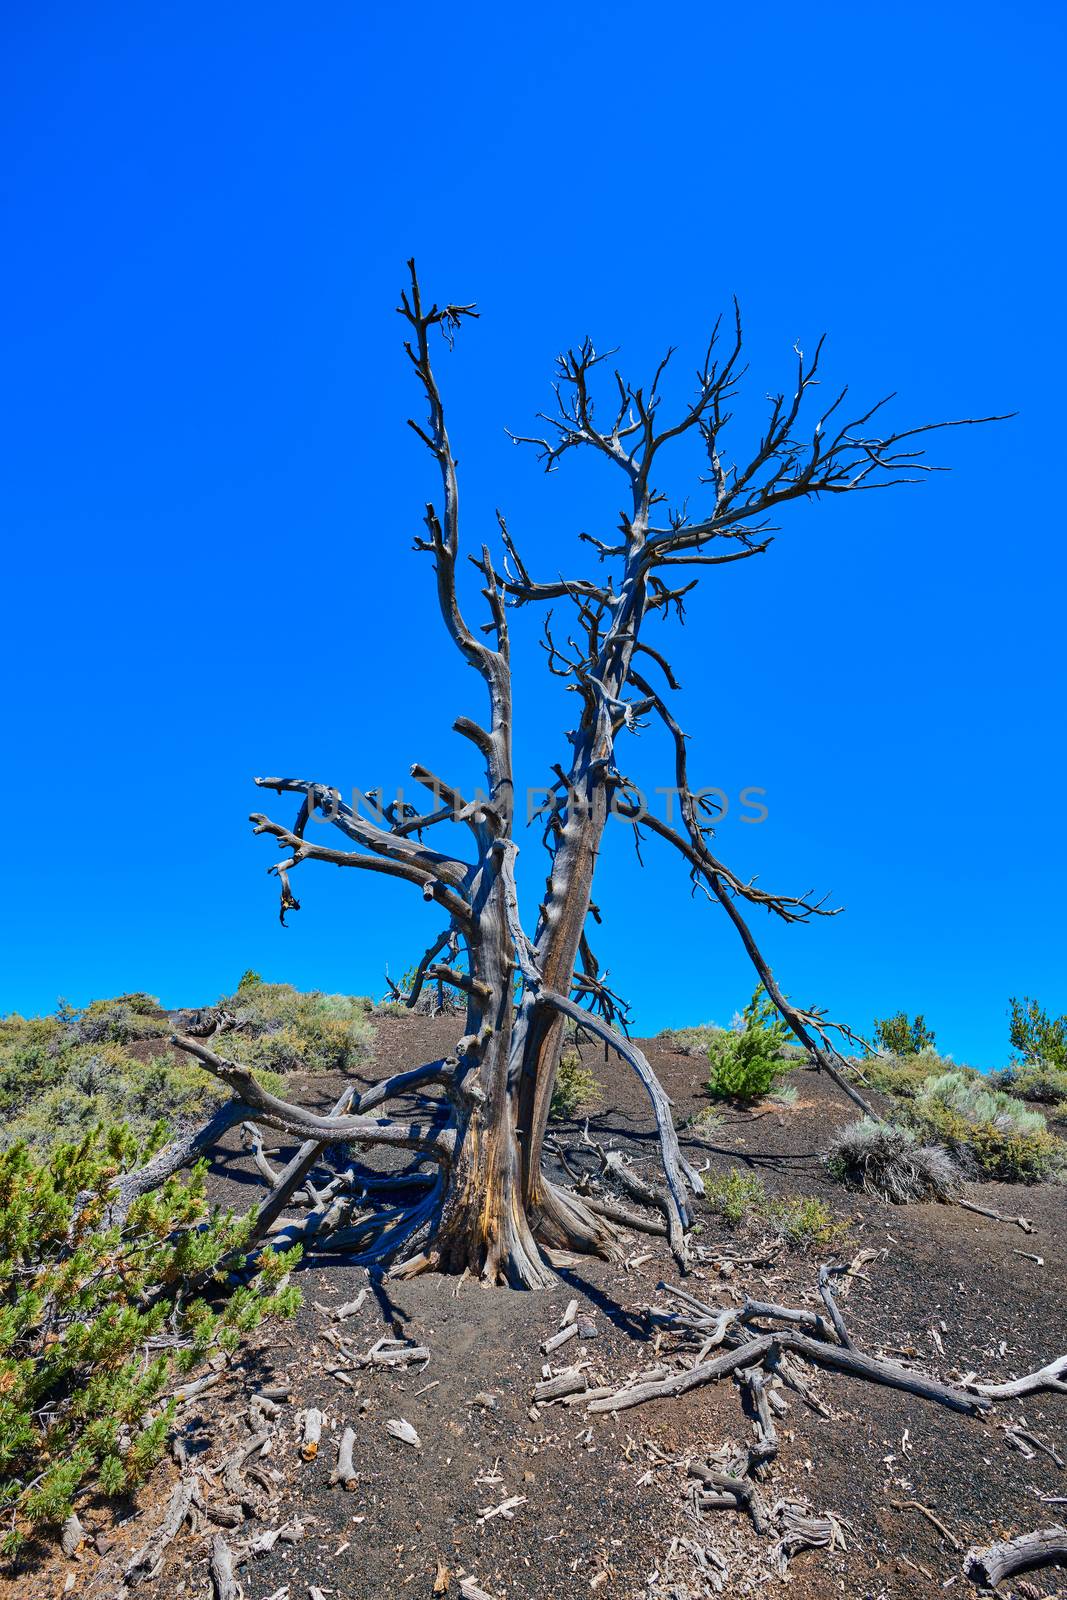 Dead Limber Pine with sun and blue sky. At Craters of the Moon National Park.